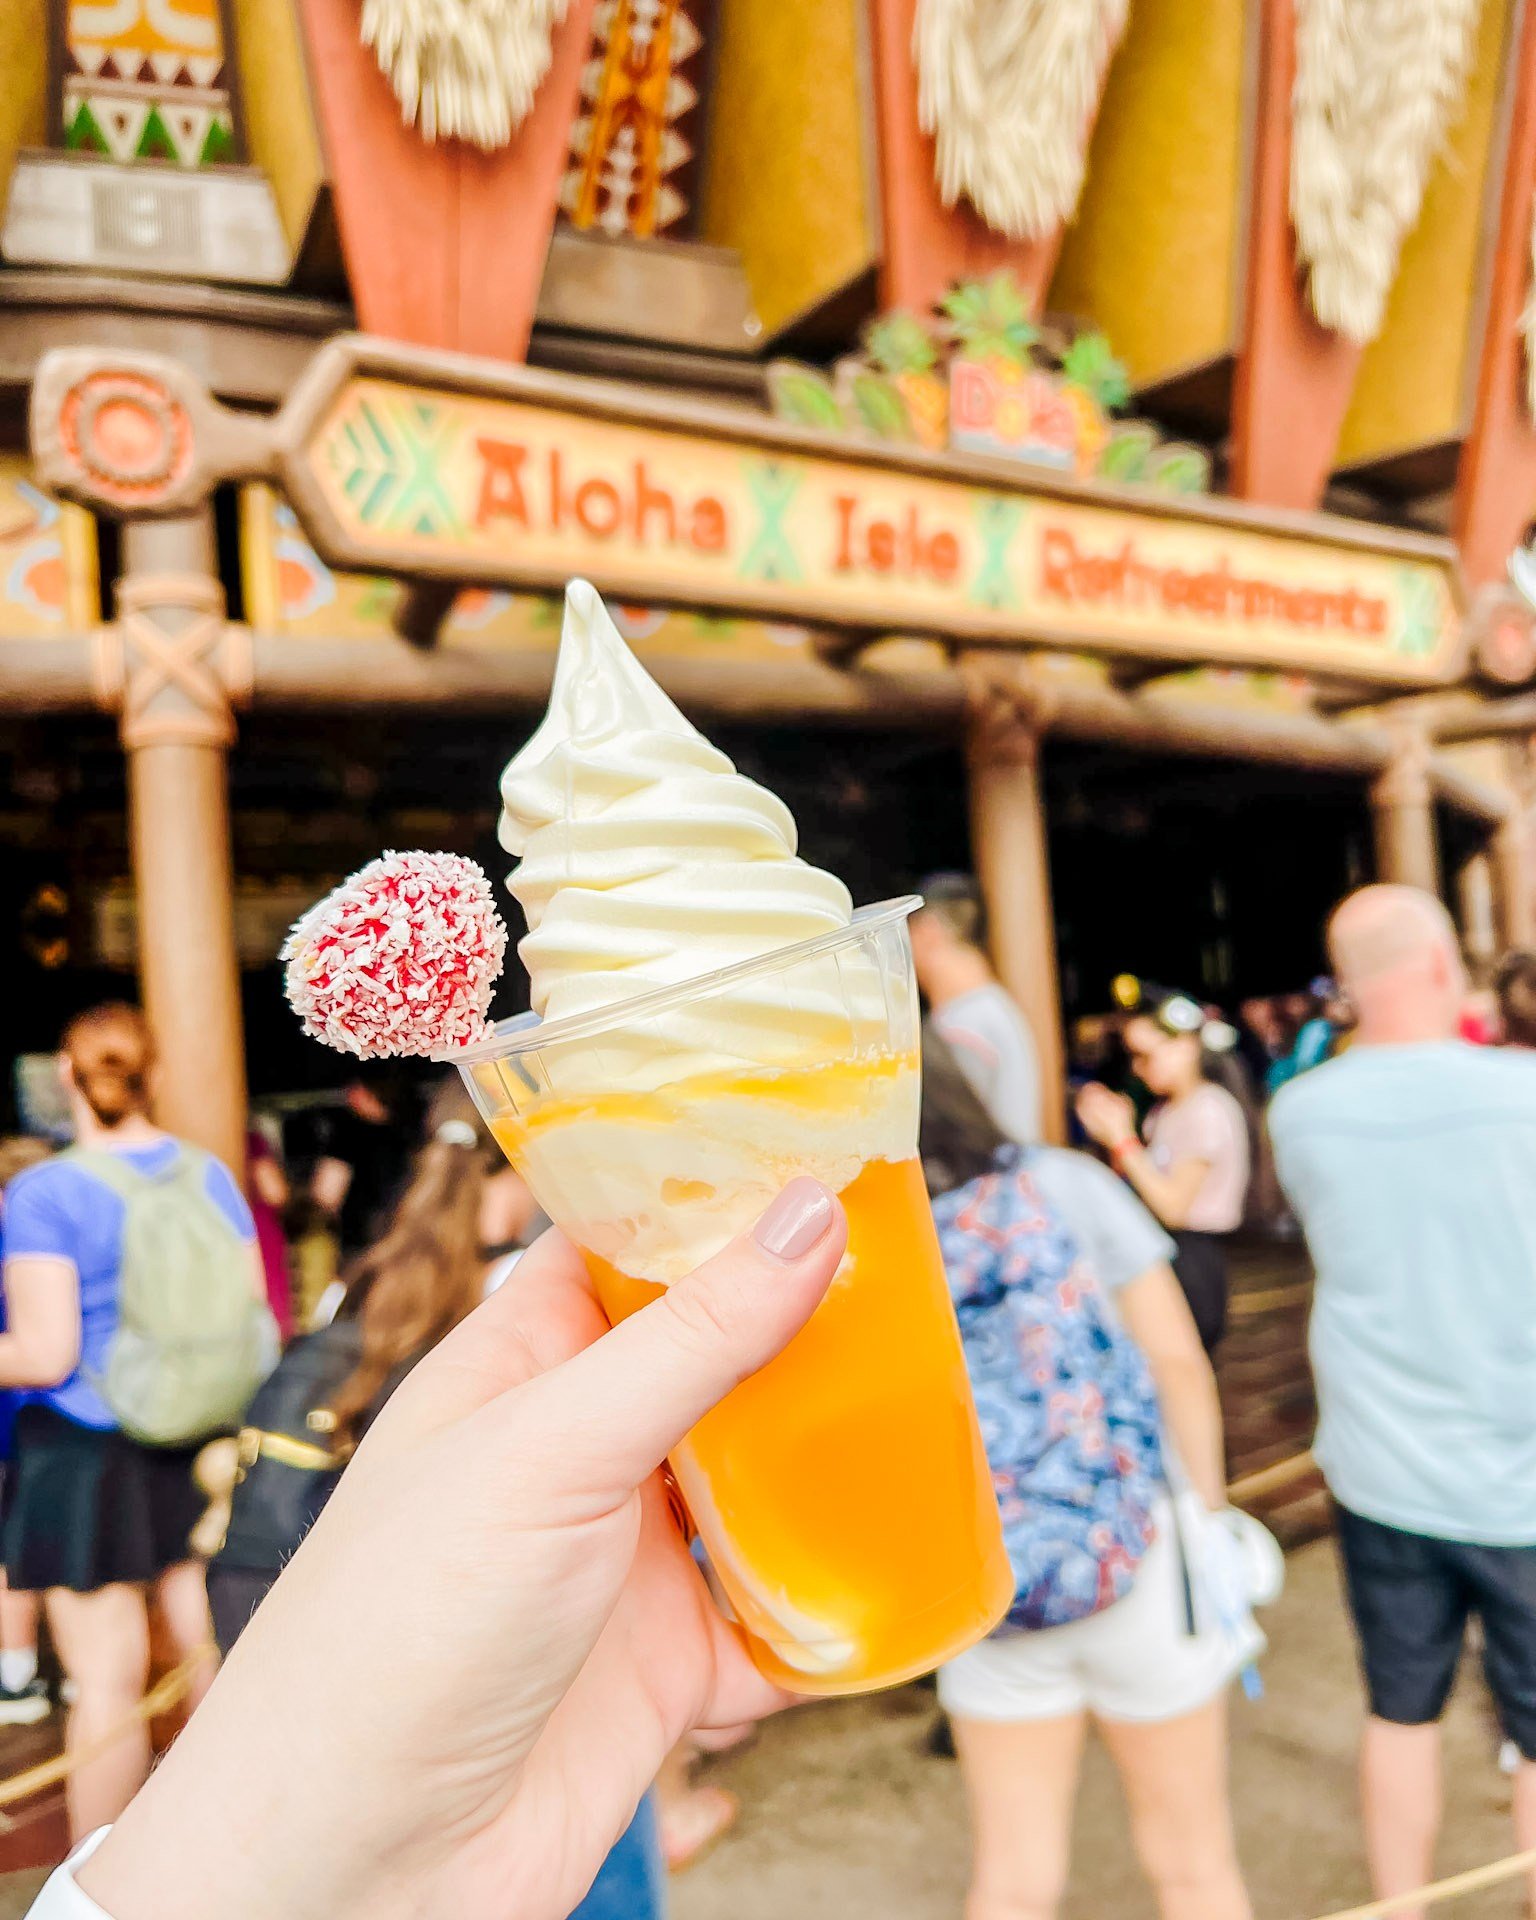 Dole Whip is pretty great, BUT if I'm being honest, my FAVORITE Dole Whip Treat is the Tropical Serenade at Aloha Isle in Magic Kingdom. 
.
It's Coconut Soft-Serve with POG Juice and it's topped with a pineapple upside-down cake pop. The coconut is m